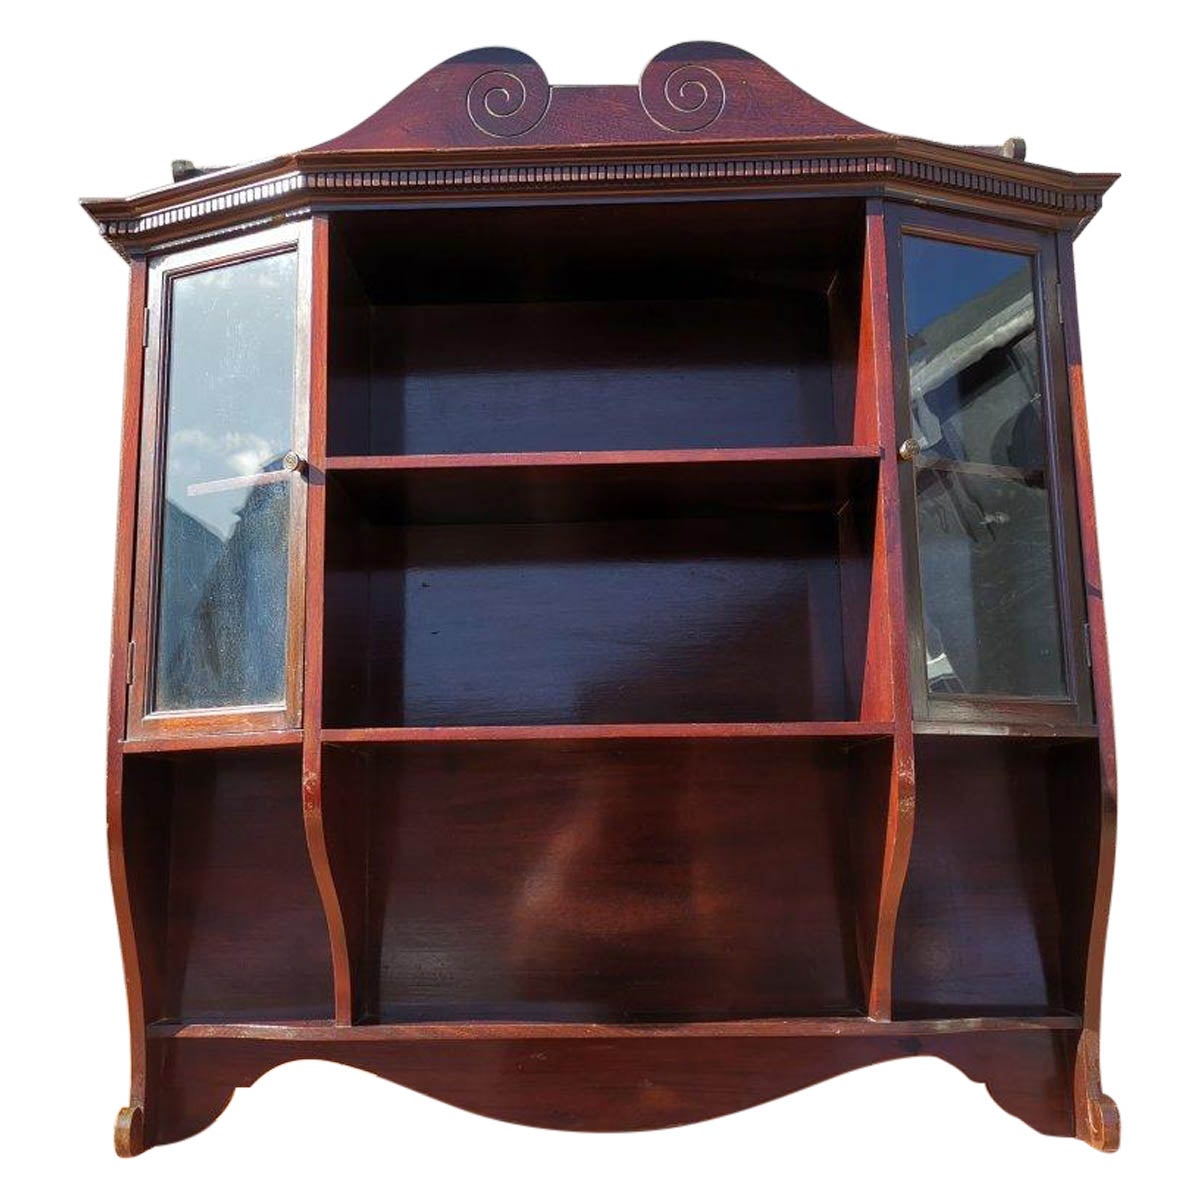 Collinson & Lock an English Aesthetic Movement Mahogany Glazed Wall Cabinet For Sale